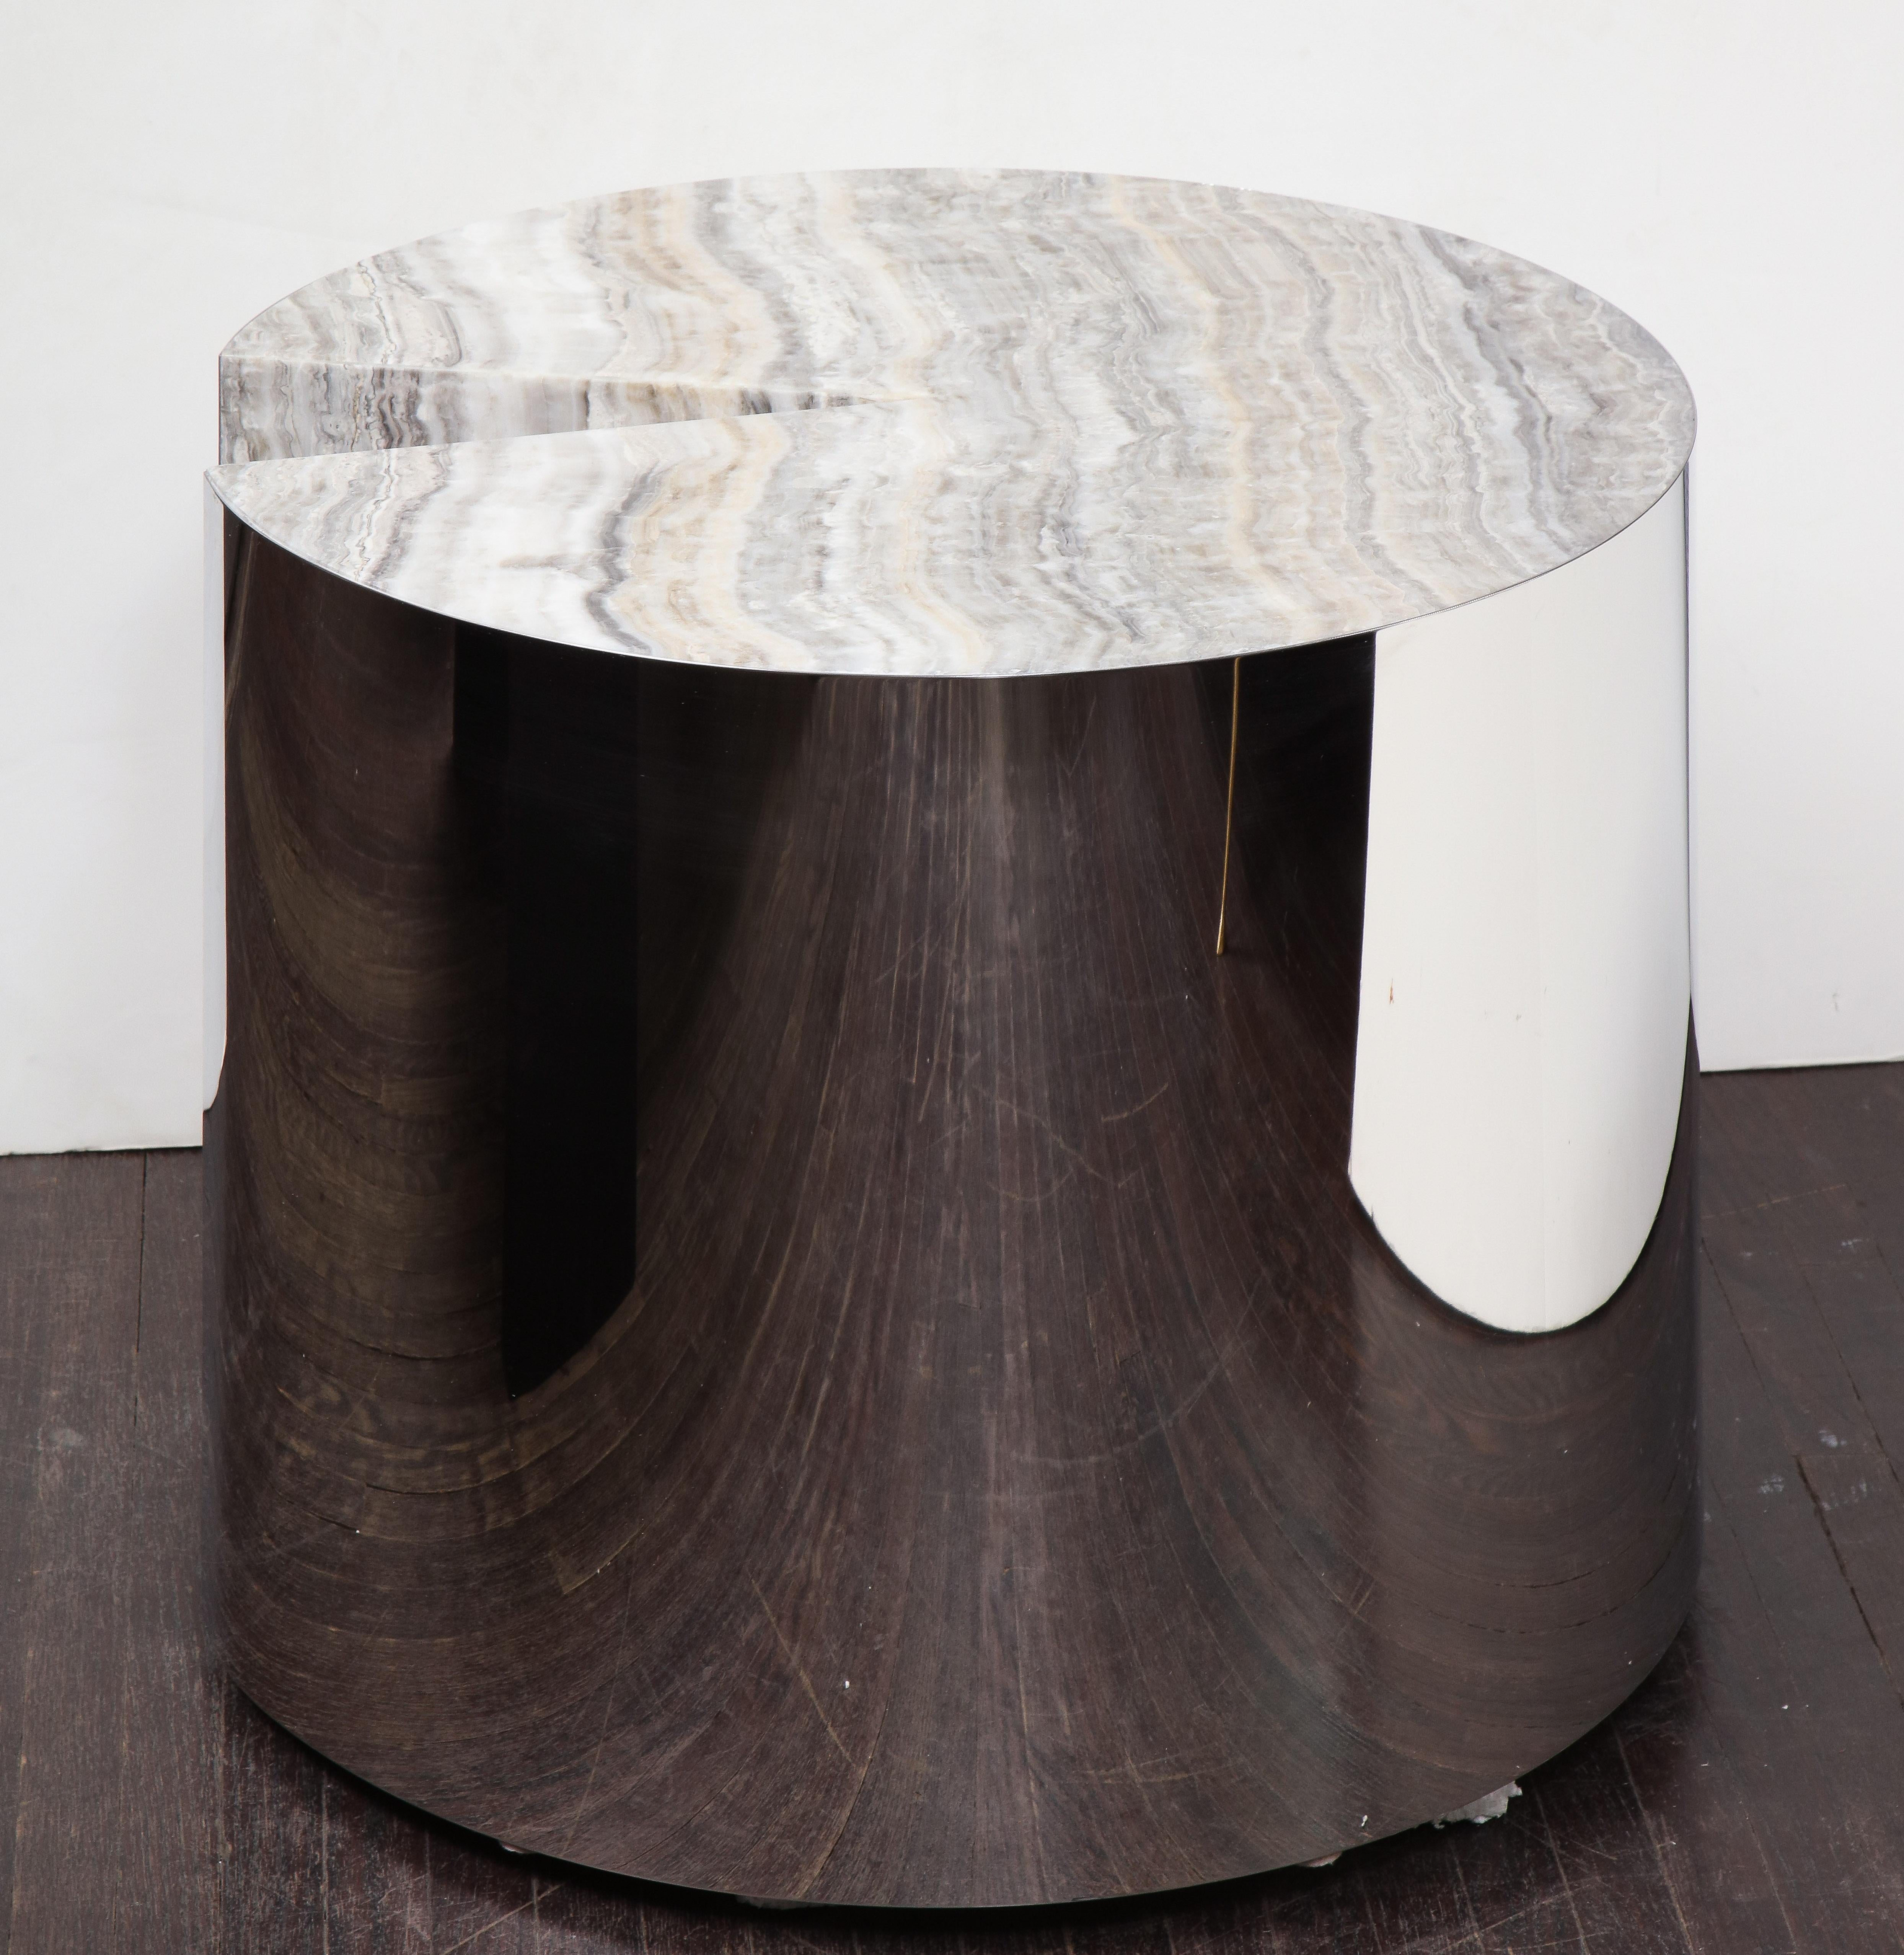 Custom onyx and wrapped stainless steel side table is available for order. Customizations are available for different finishes, dimensions, and stone (price may vary depending on the type of stone).